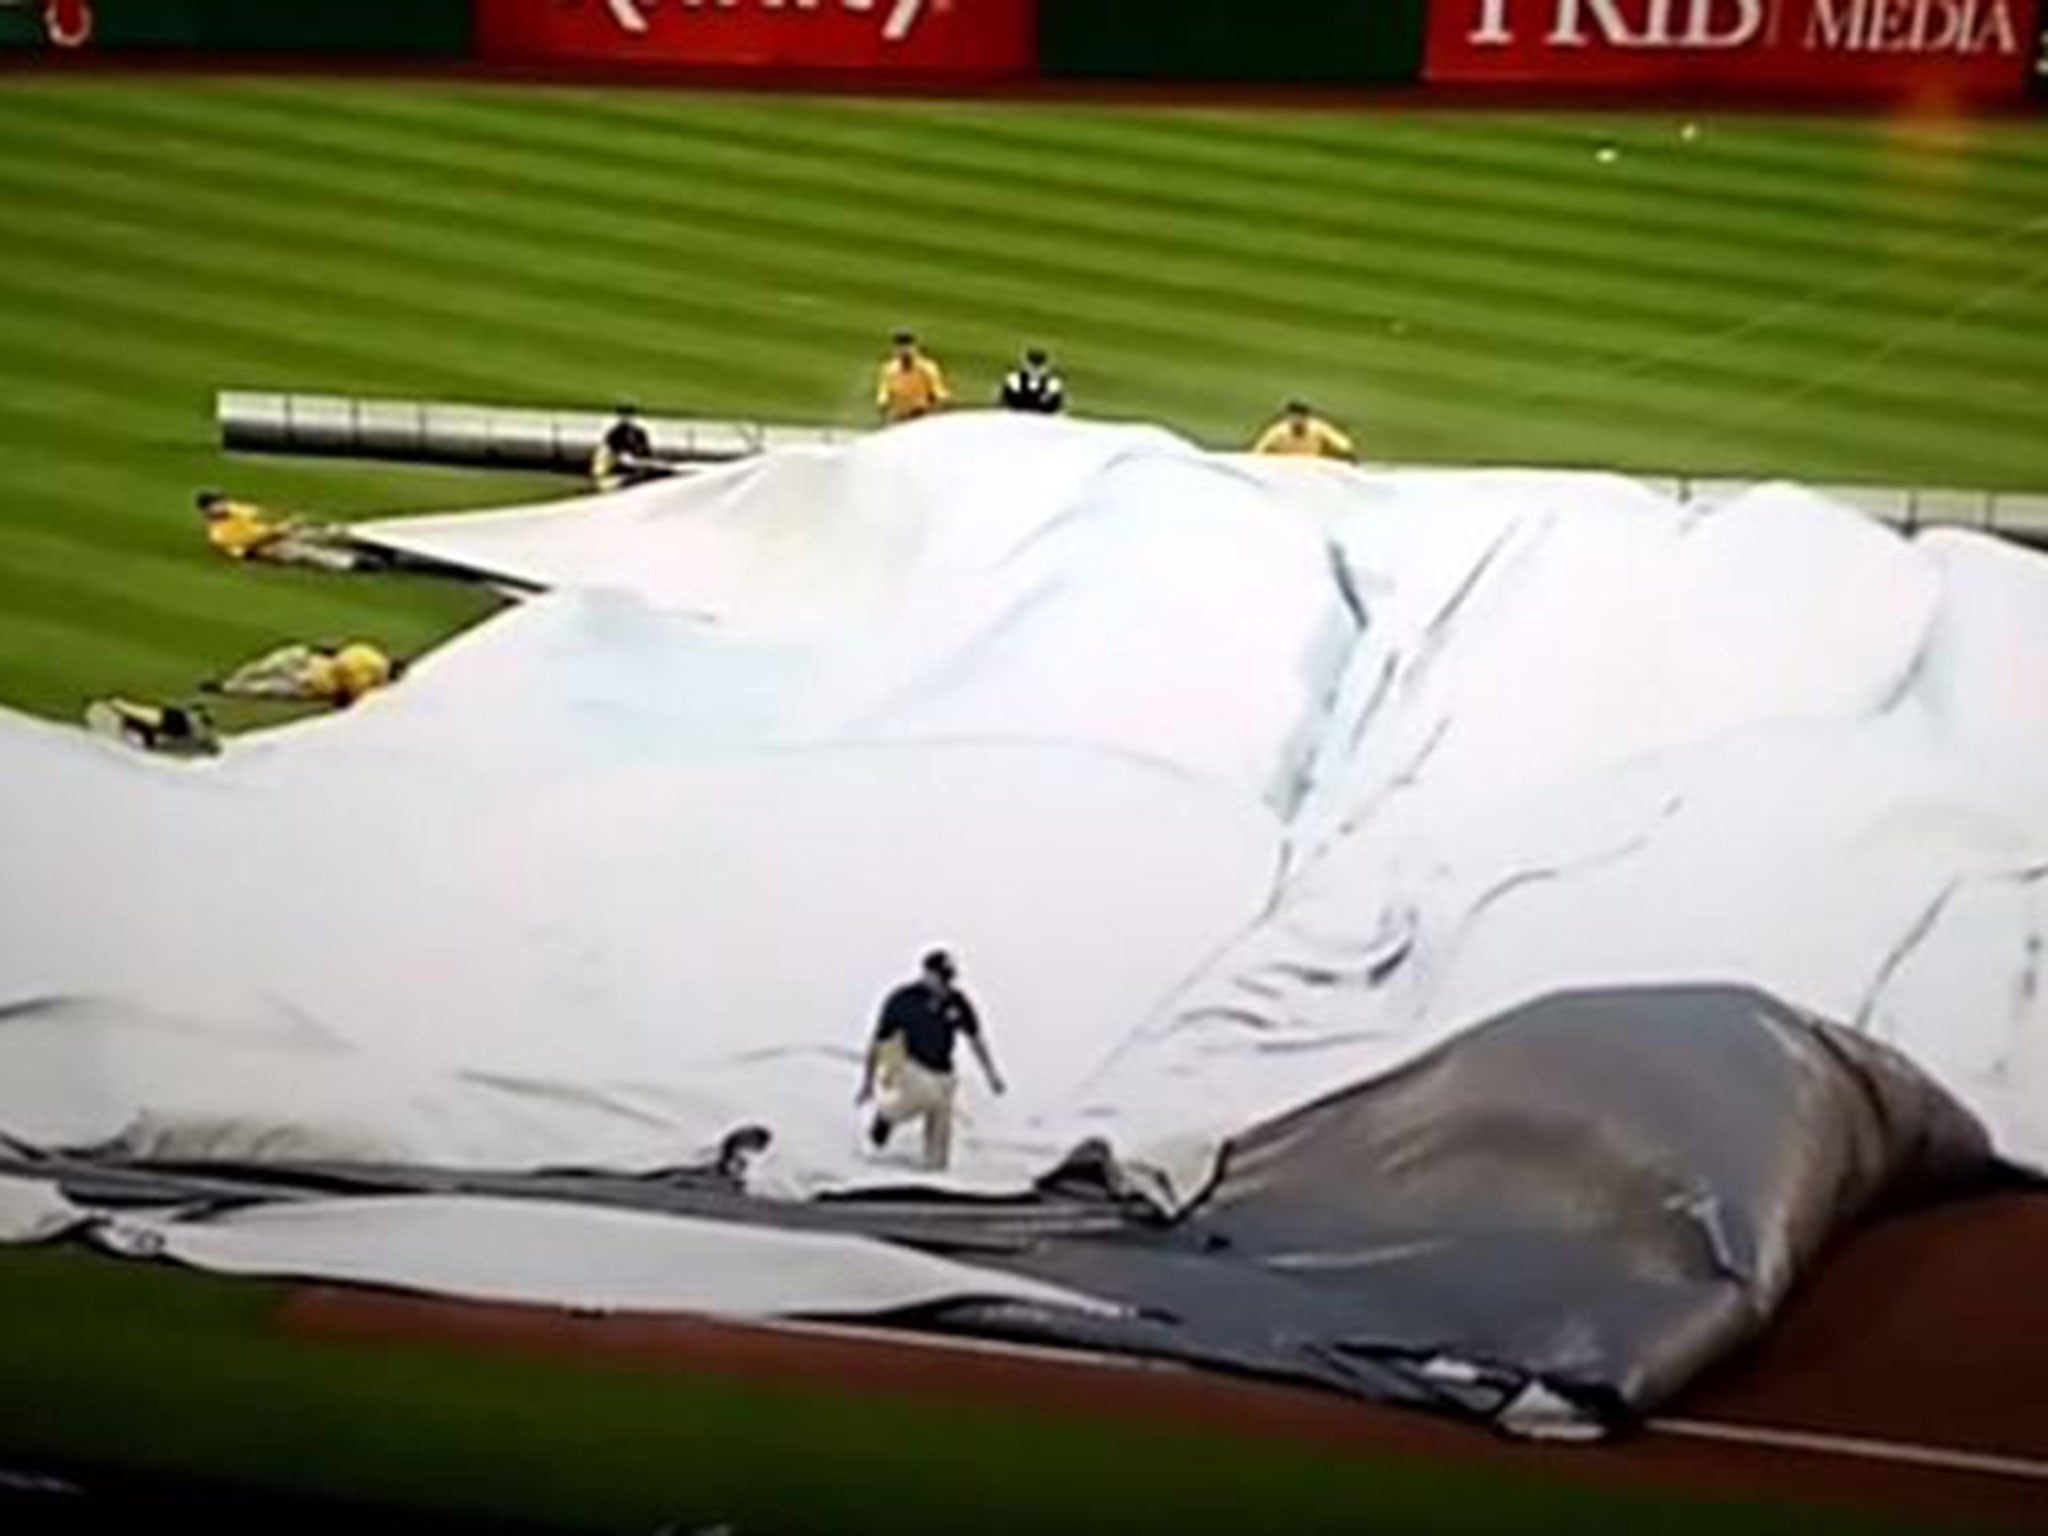 The ground staff attempt to lay down a tarpaulin sheet on the pitch